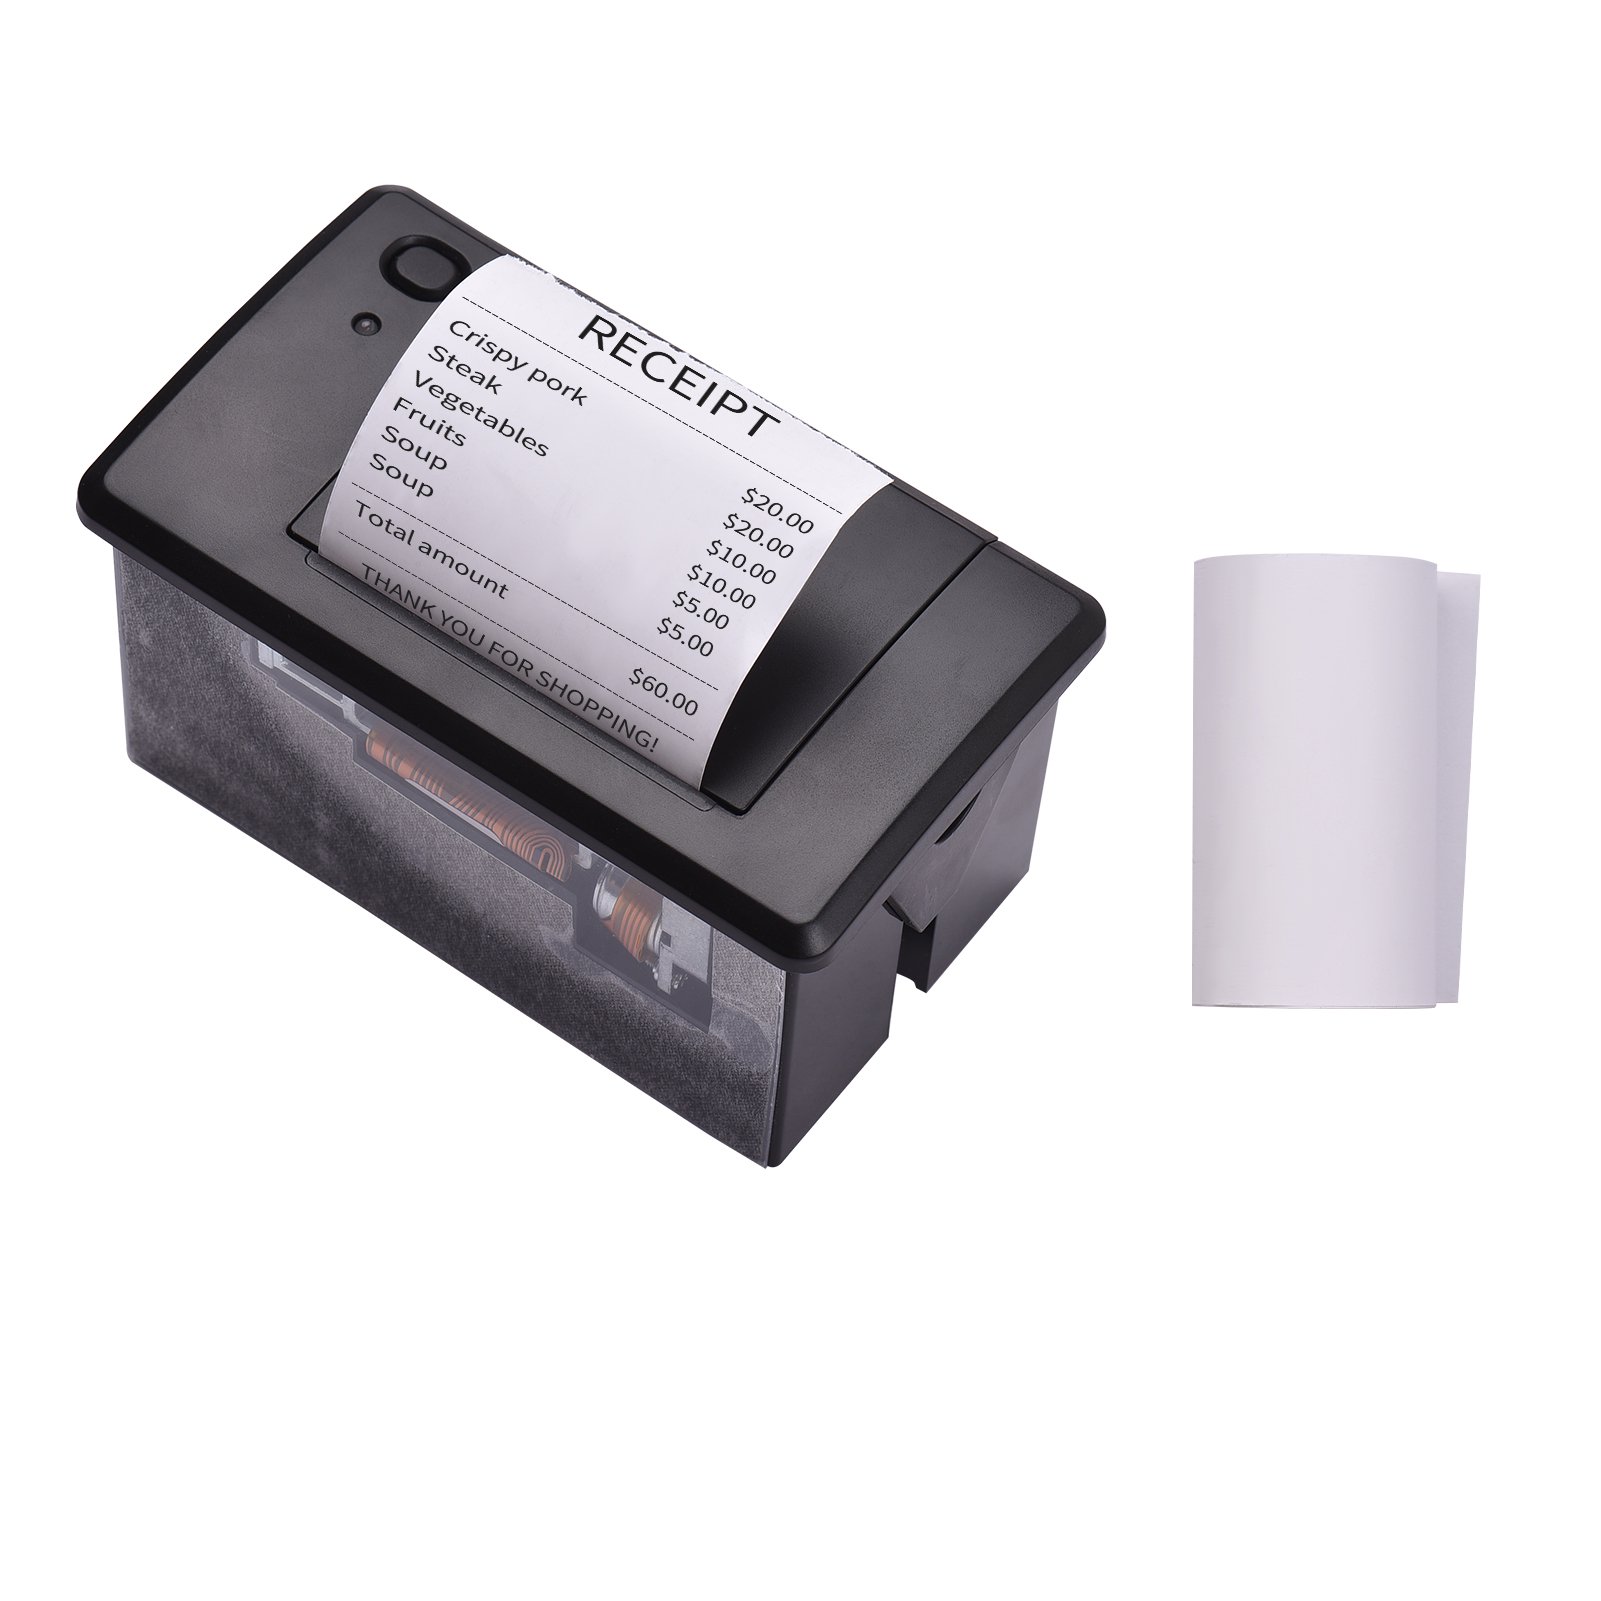 Embedded Thermal Receipt Printer 58MM Mini Printing Module Low Noise with USB/RS232/TTL Serial Port Support ESC/POS Commands for Weighing Apparatus Cash Register Self-Service Terminal